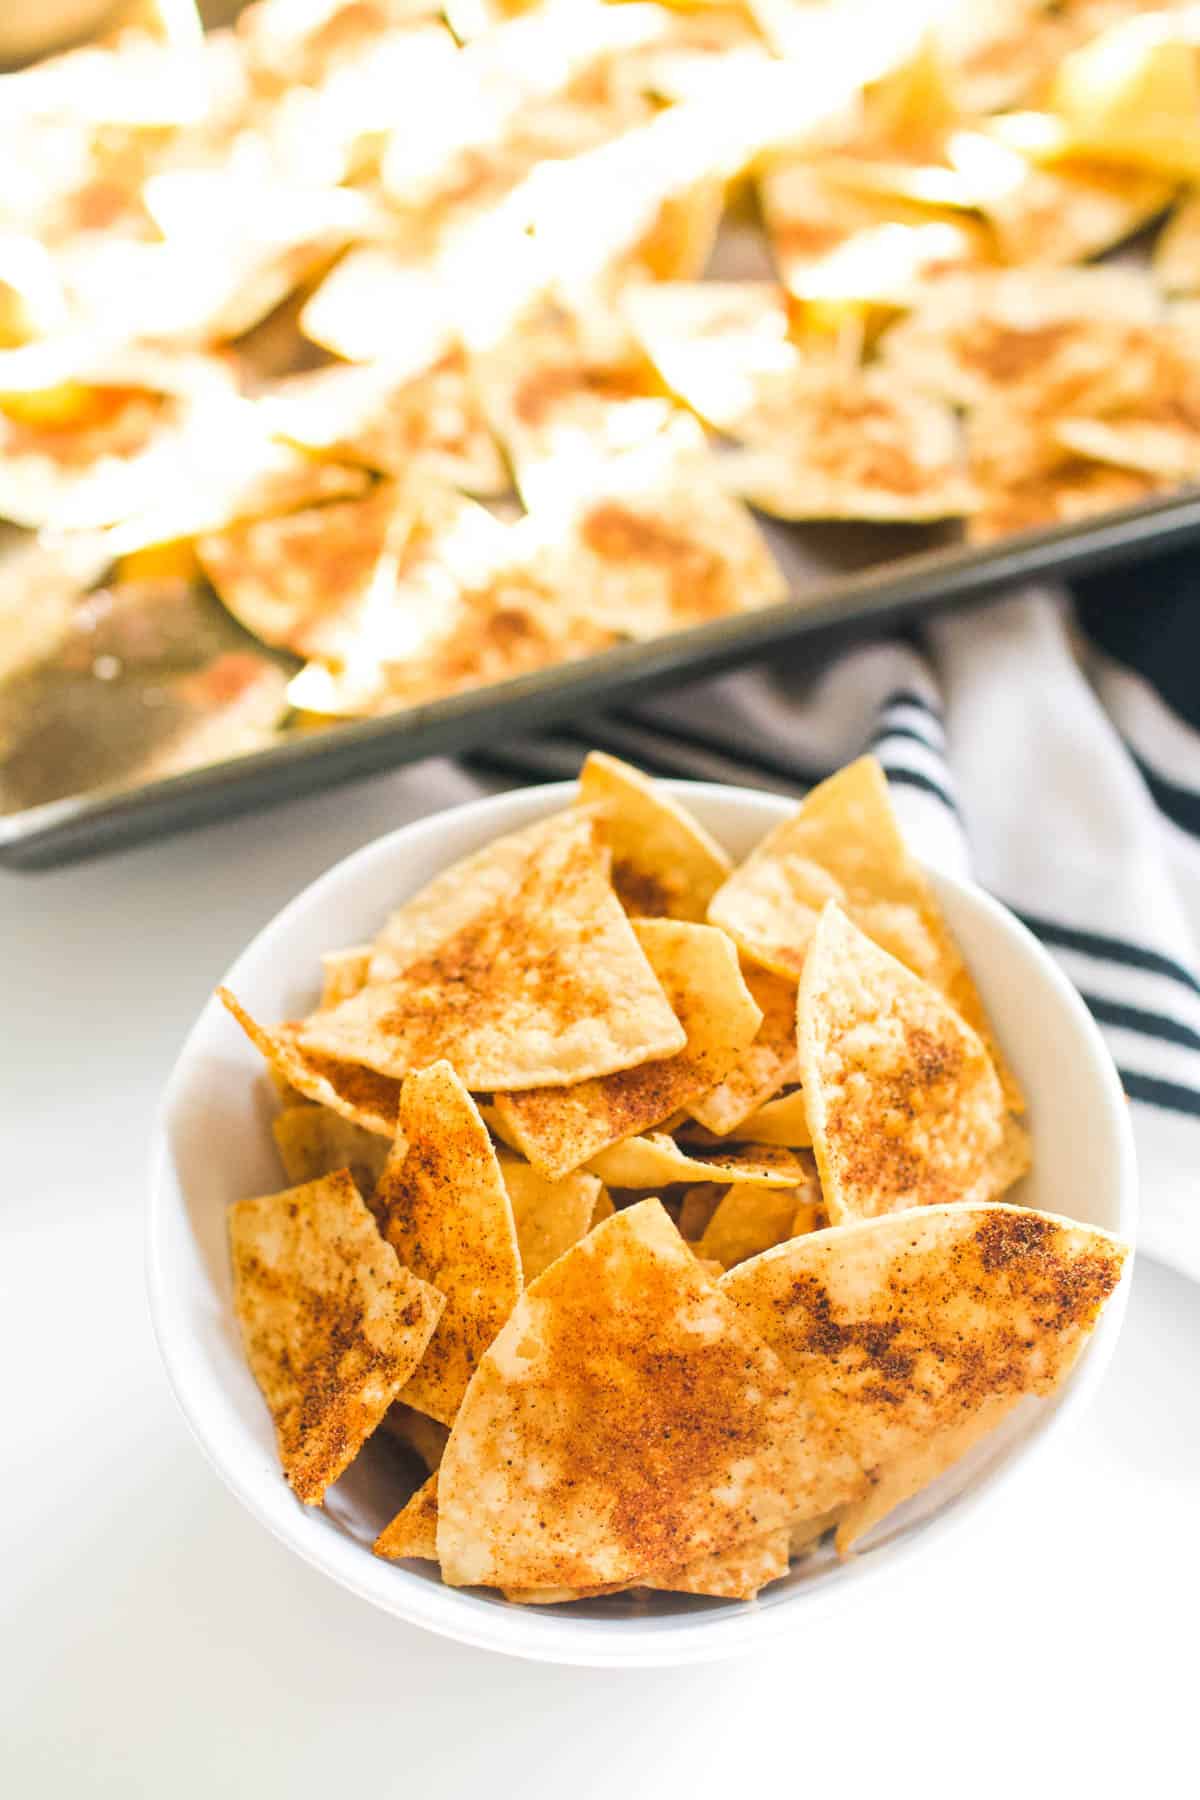 Store bought tortilla chips seasoned with spice mix in a white bowl, next to a sheet pan filled with tortilla chips.